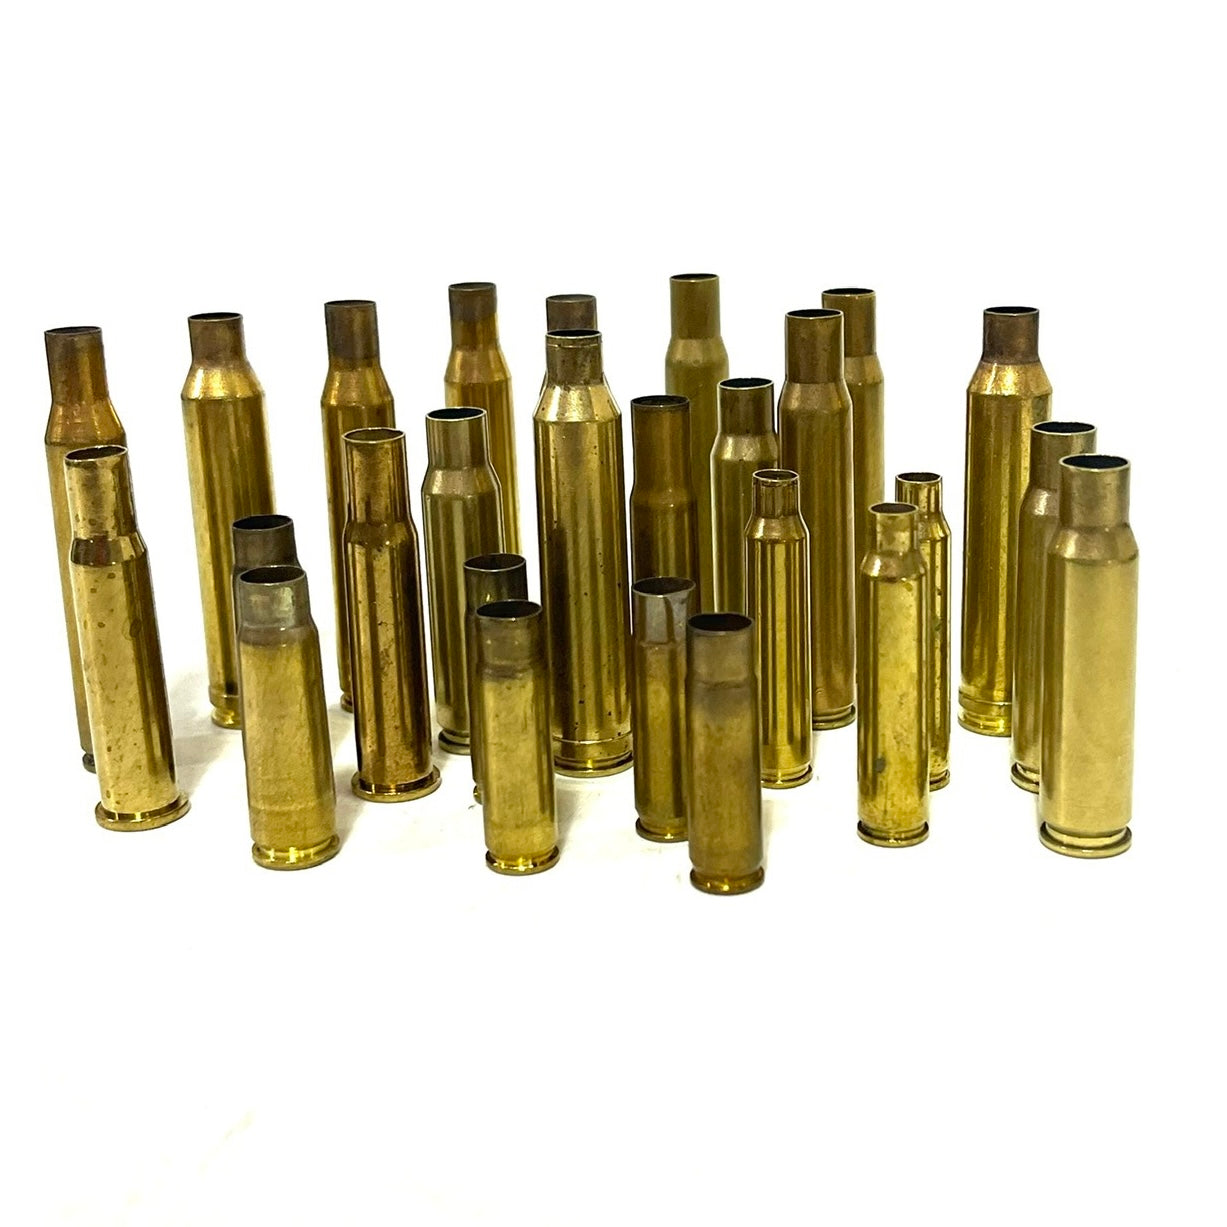 Ammo casings are a source of much debate and confusion.